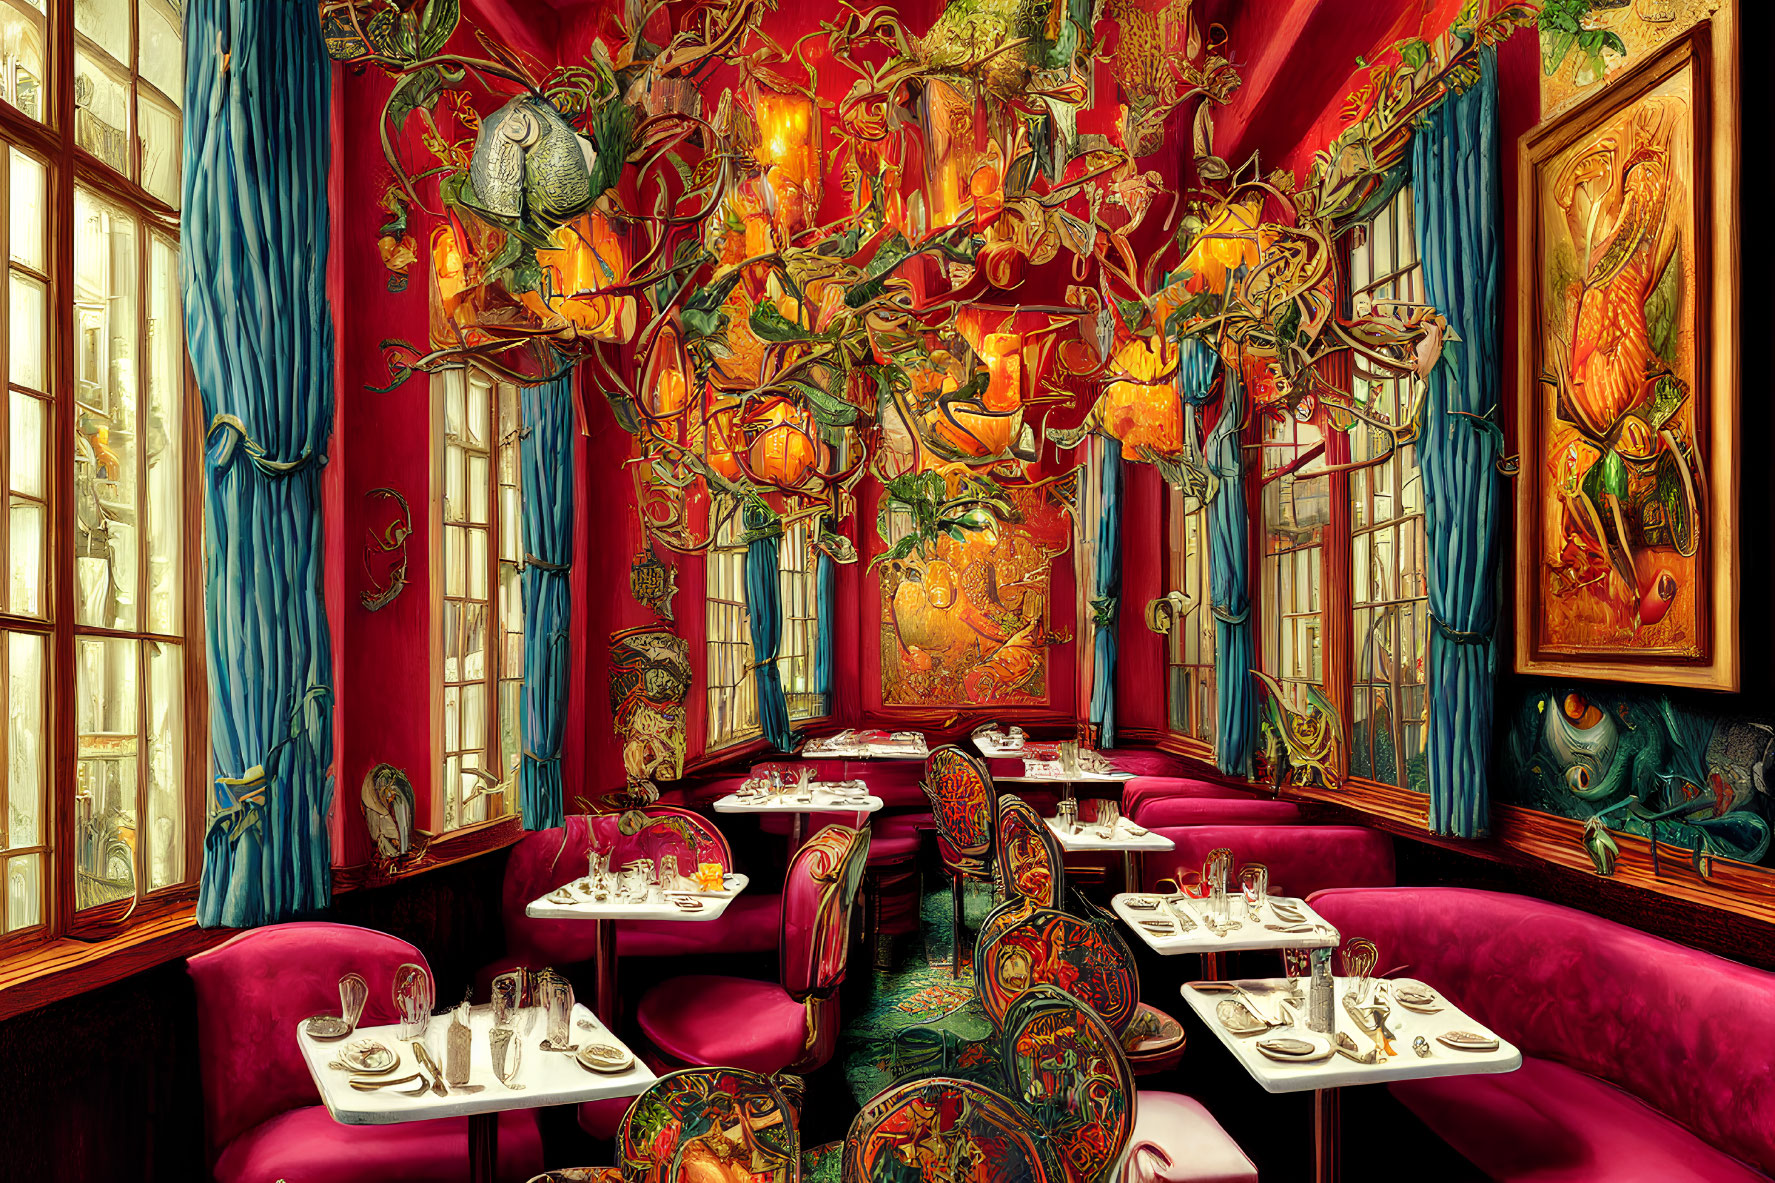 Luxurious Dining Room with Red Walls and Elaborate Decor